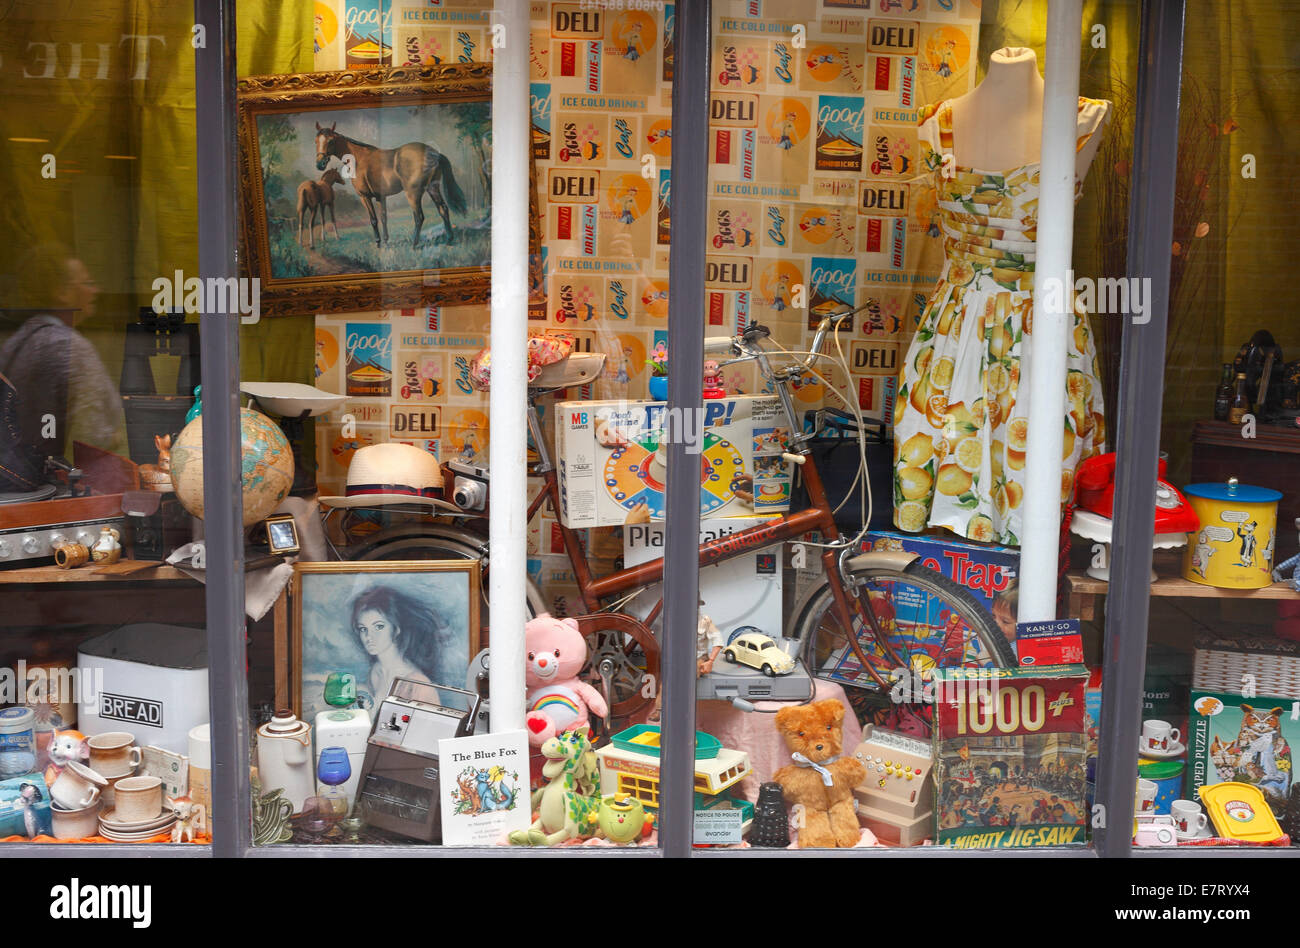 Charity shop window with old fashioned looking items for sale. Stock Photo